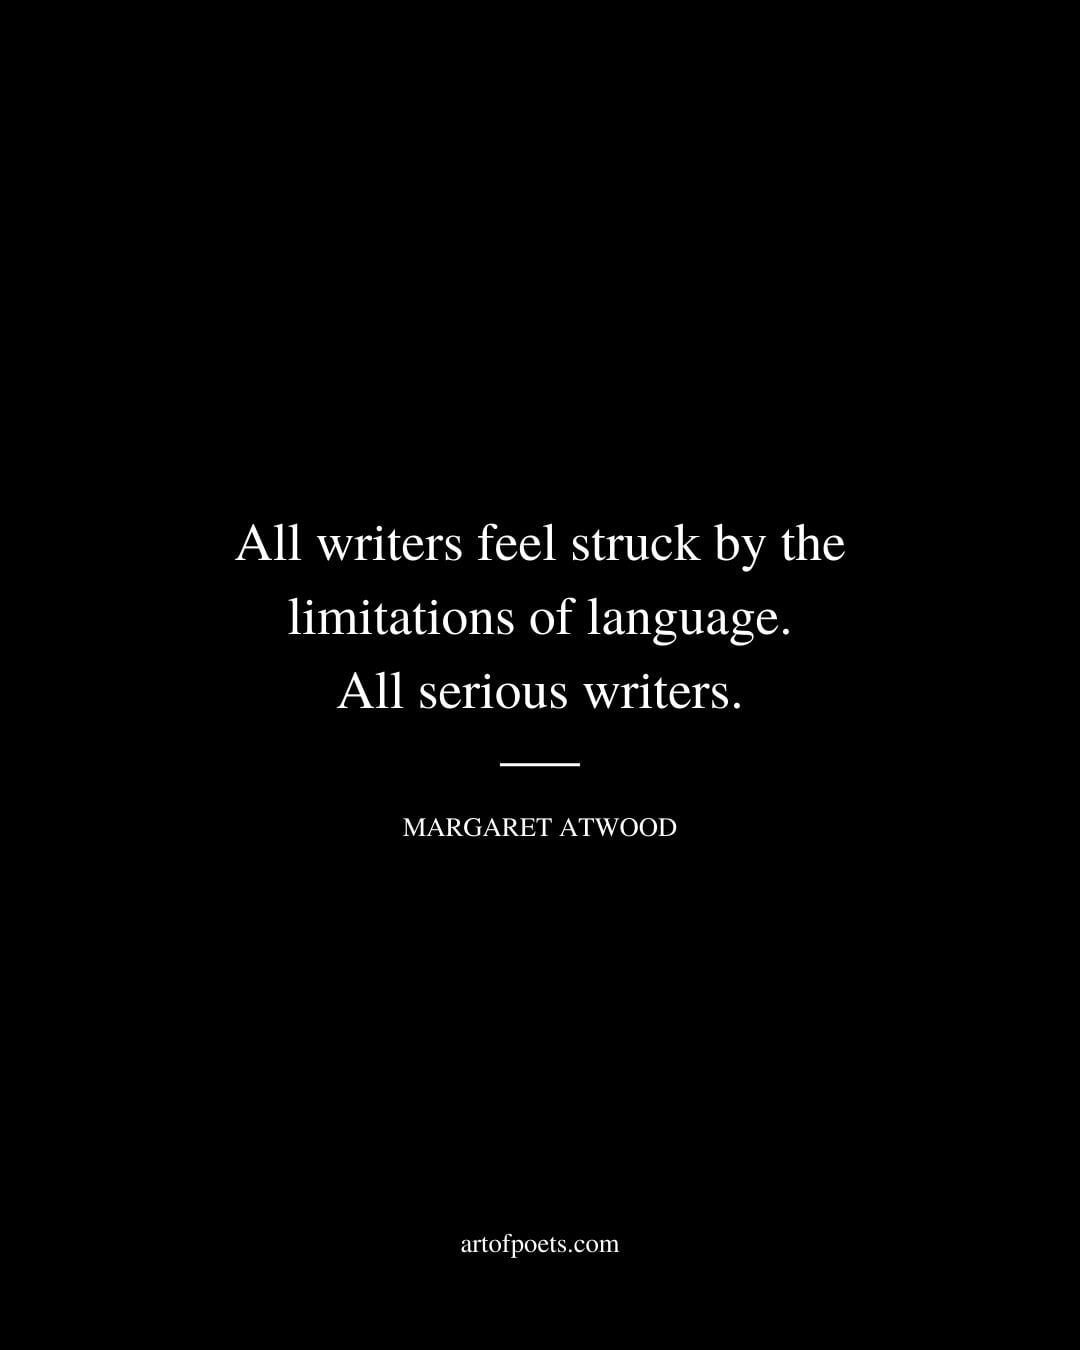 All writers feel struck by the limitations of language. All serious writers 1